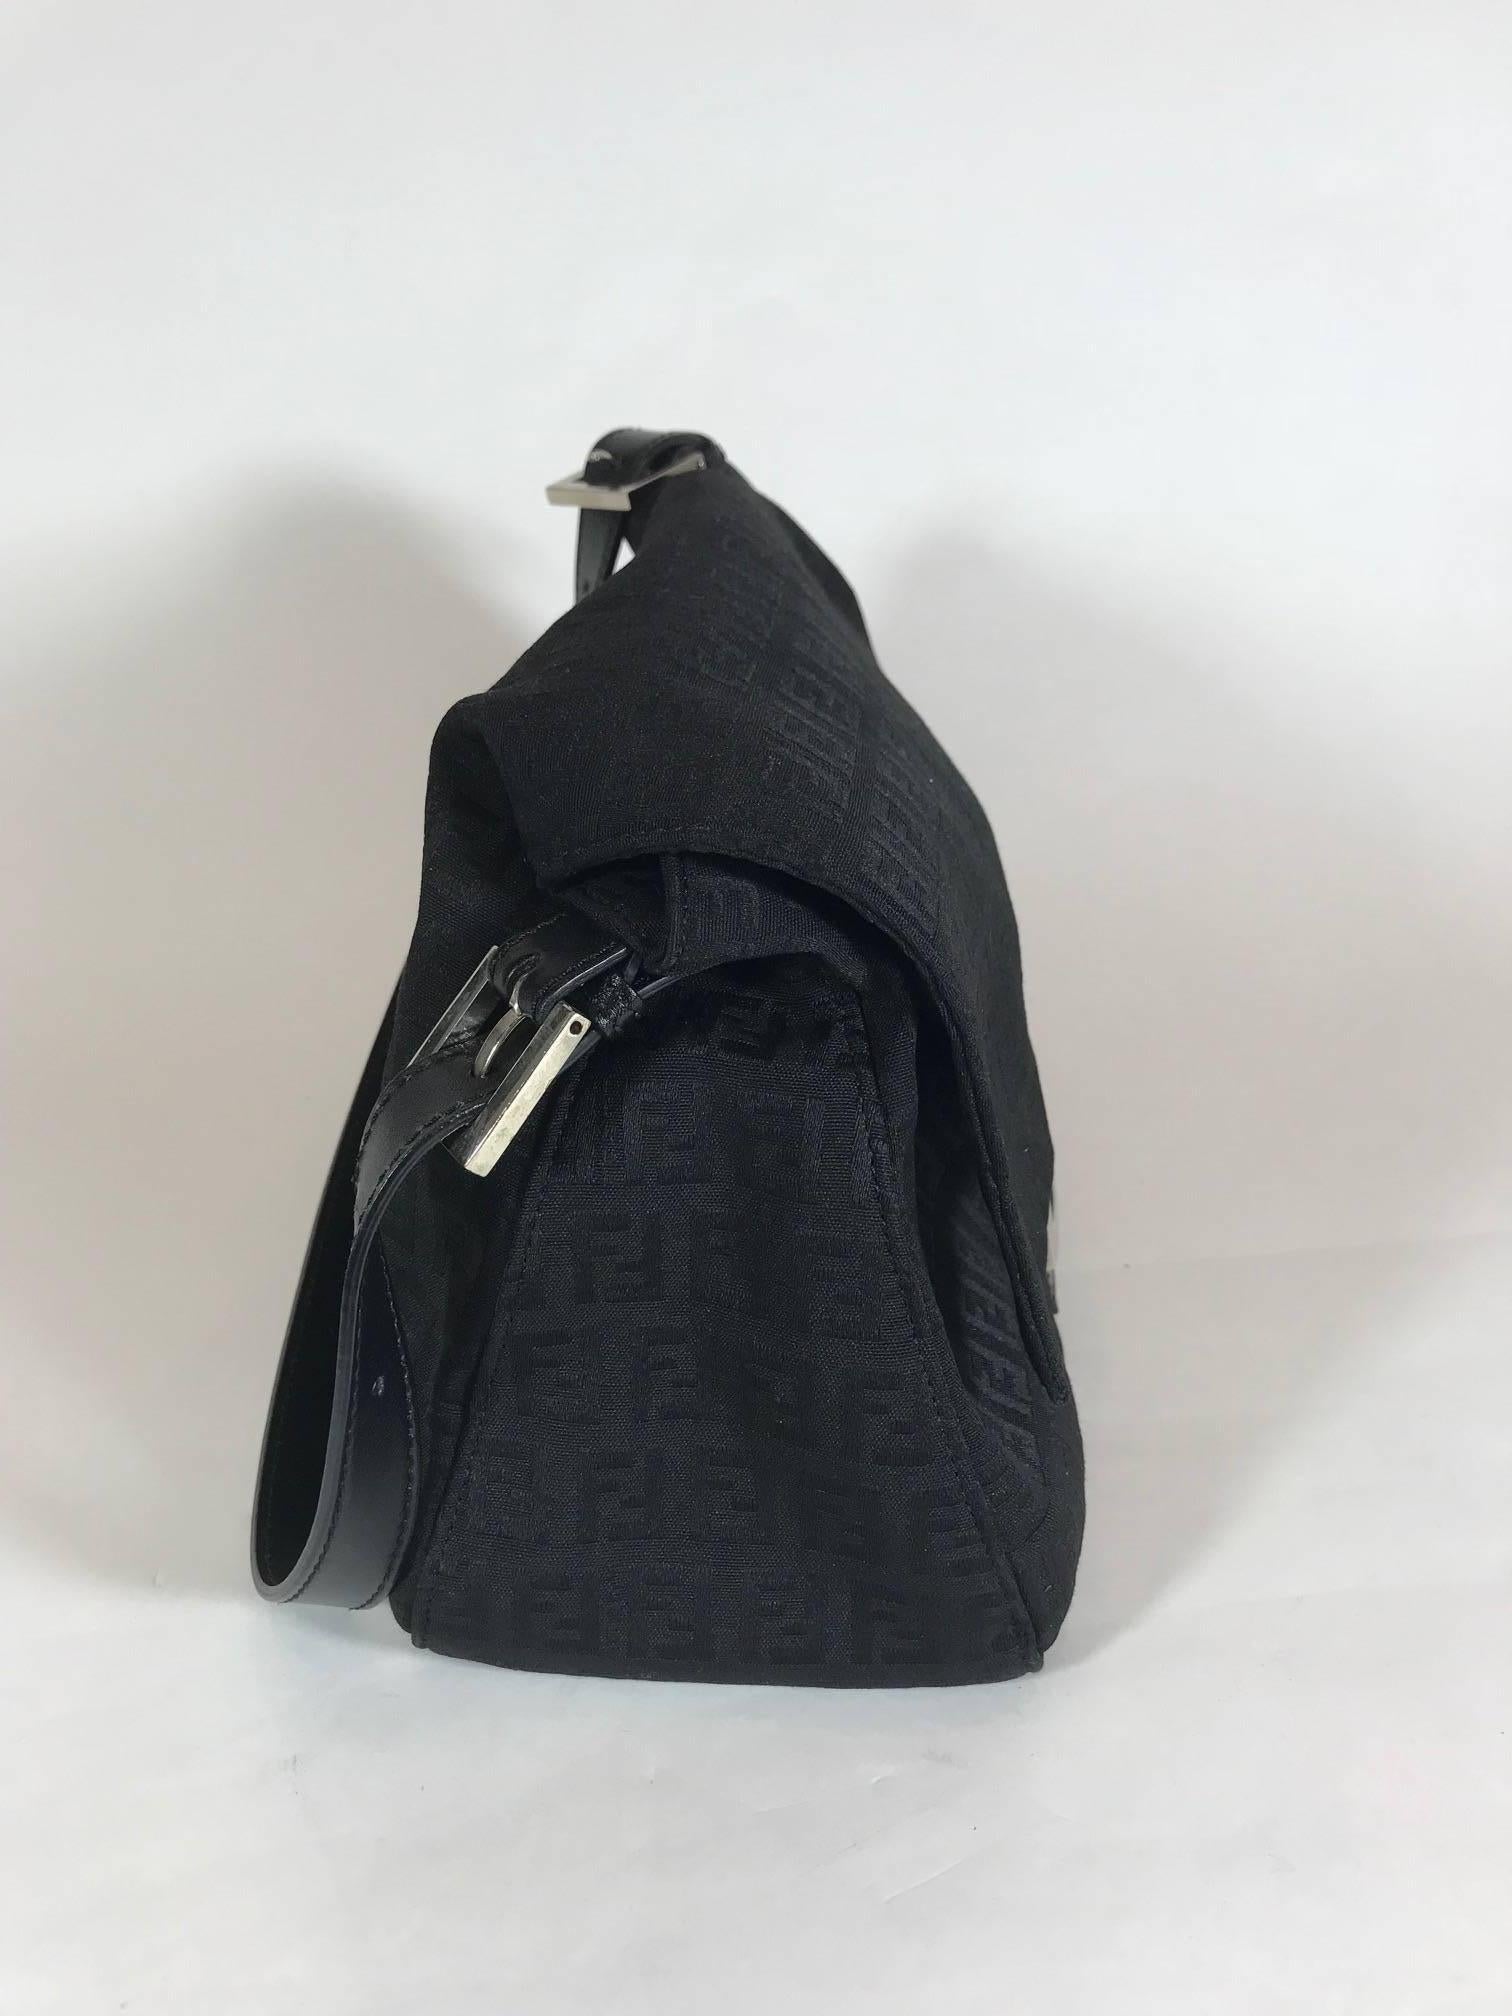 Black canvas. Silver-tone hardware. Tonal leather trim. Single flat shoulder strap. Tonal jacquard woven lining. Single zip pocket at interior wall and snap closure at front flap. Dust bag included.